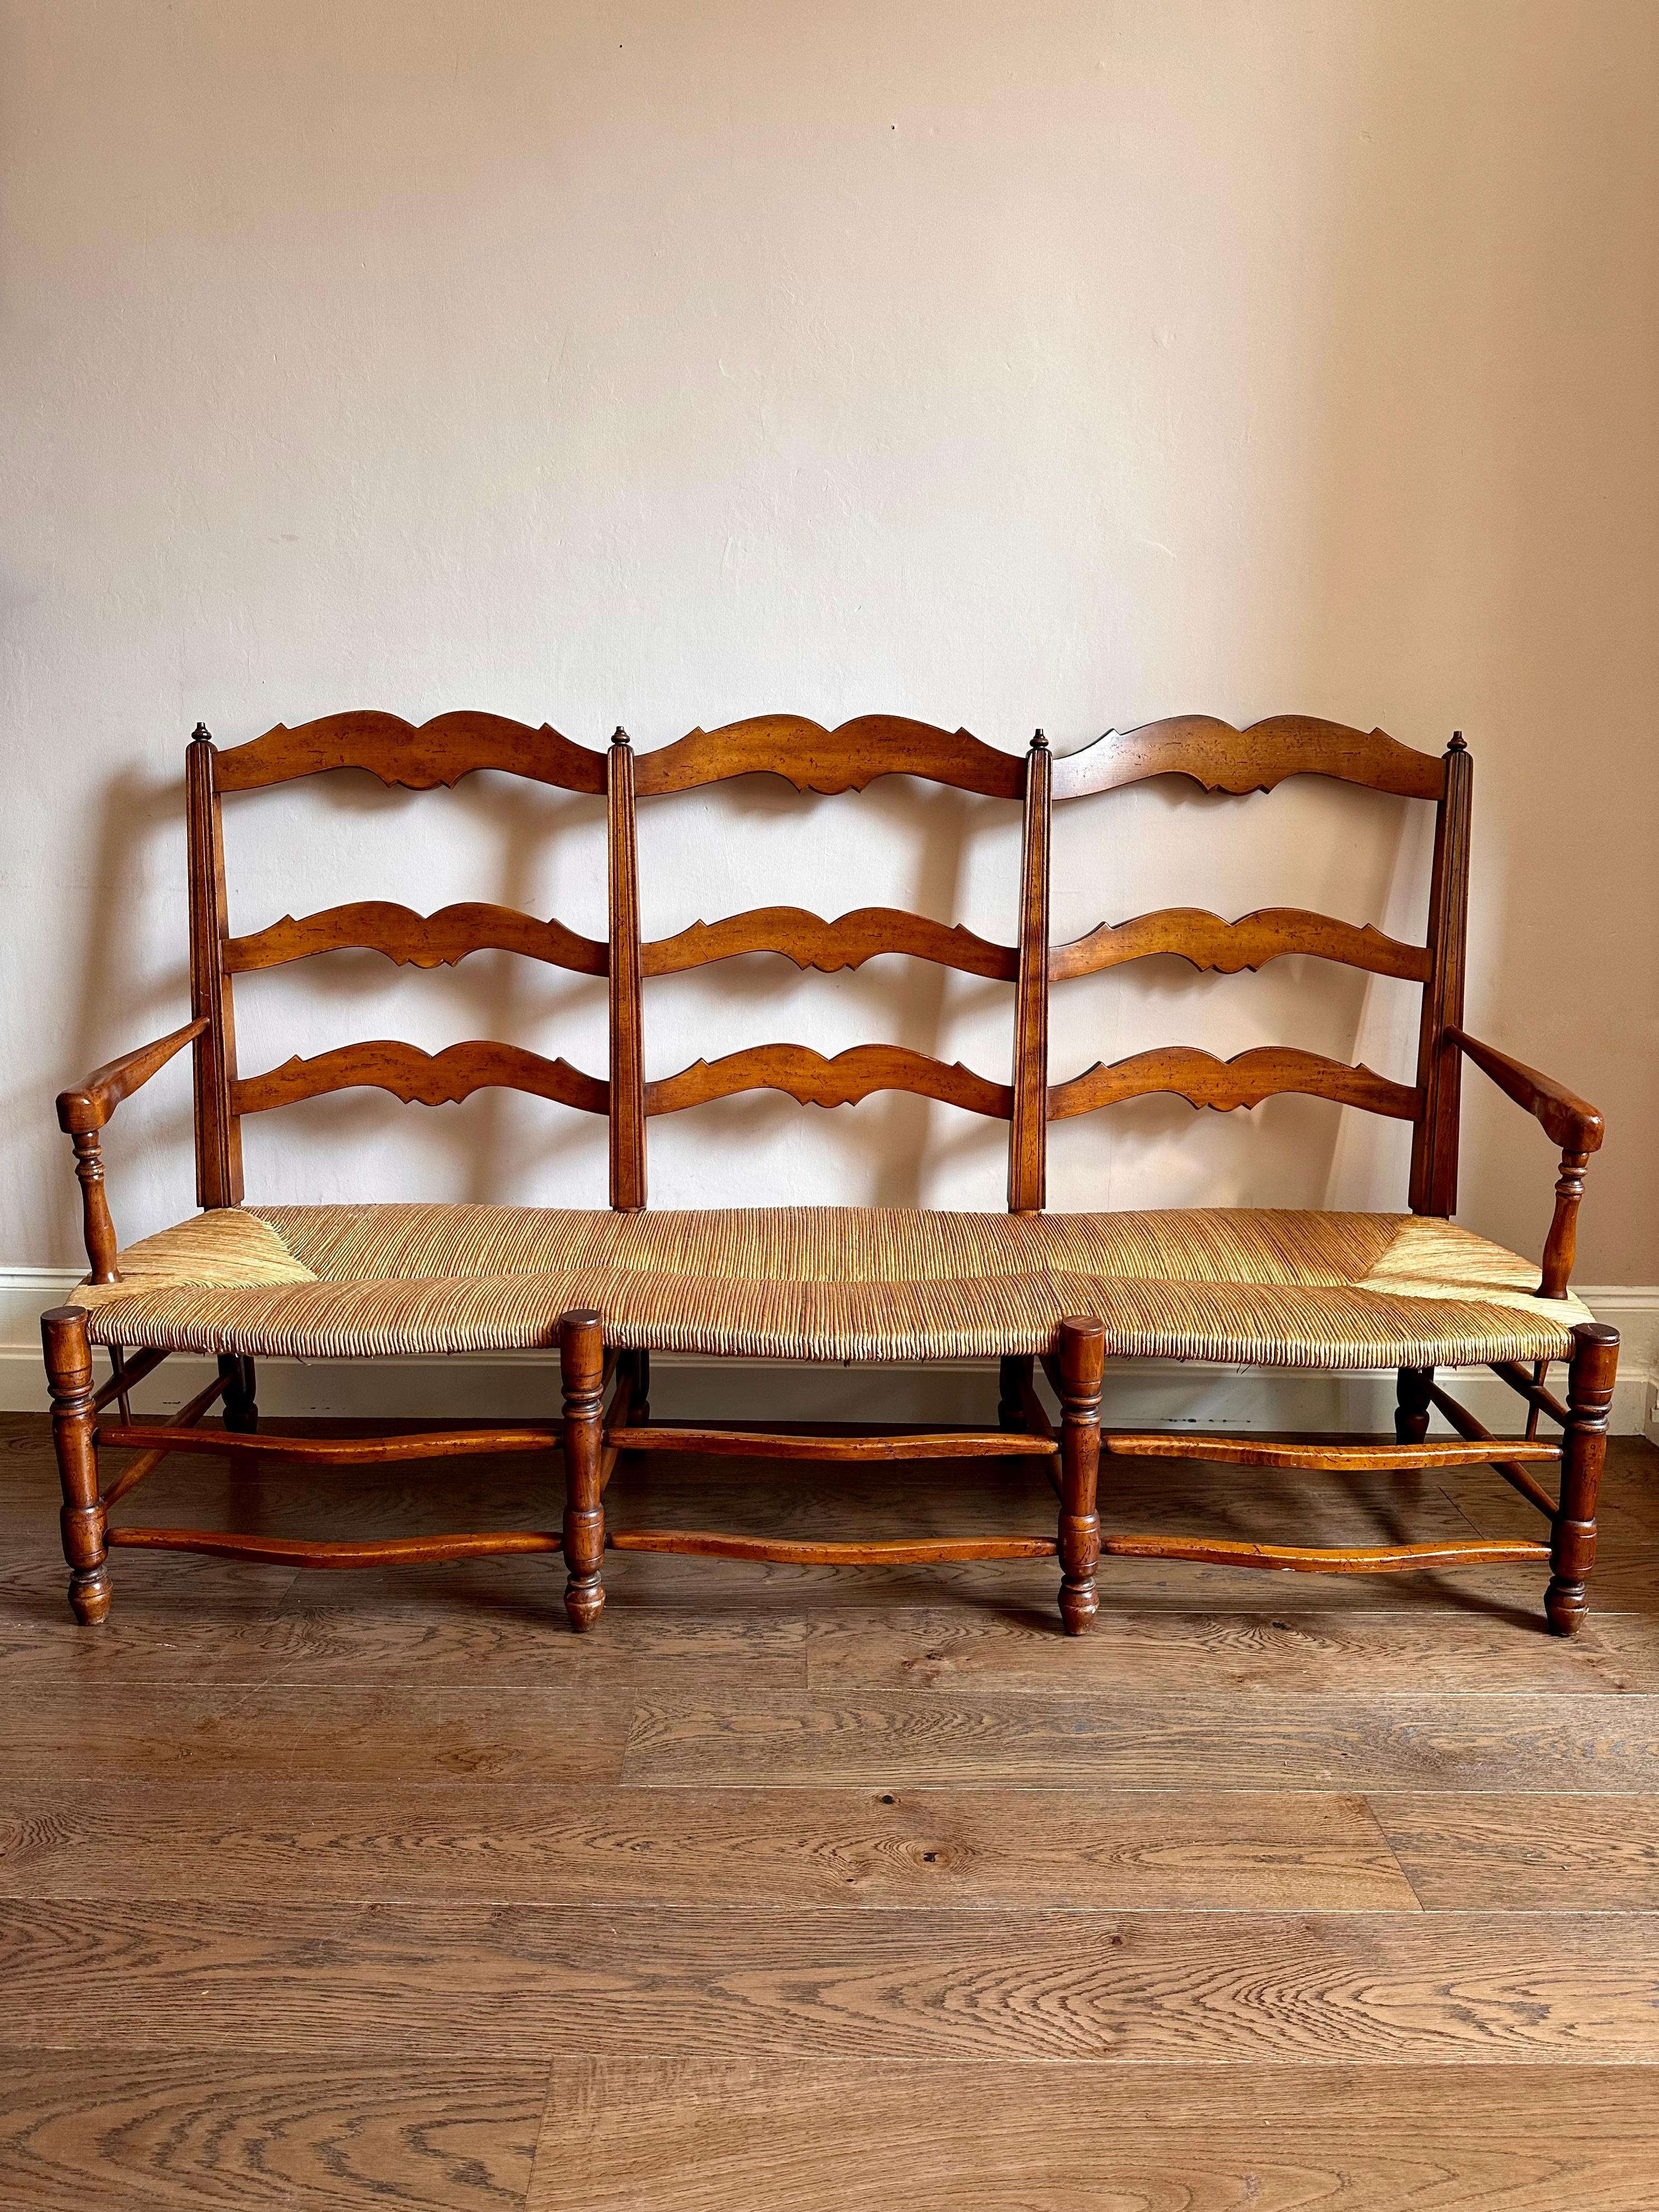 Large C19th Provencal cherry wood rush seat bench.

Beautiful French settle in a deep, warm finish with wonderfully smooth aged patina. In excellent, solid condition with minor and attractive wear. 

Length 180cm Depth 63cm Back Height 101cm Seat